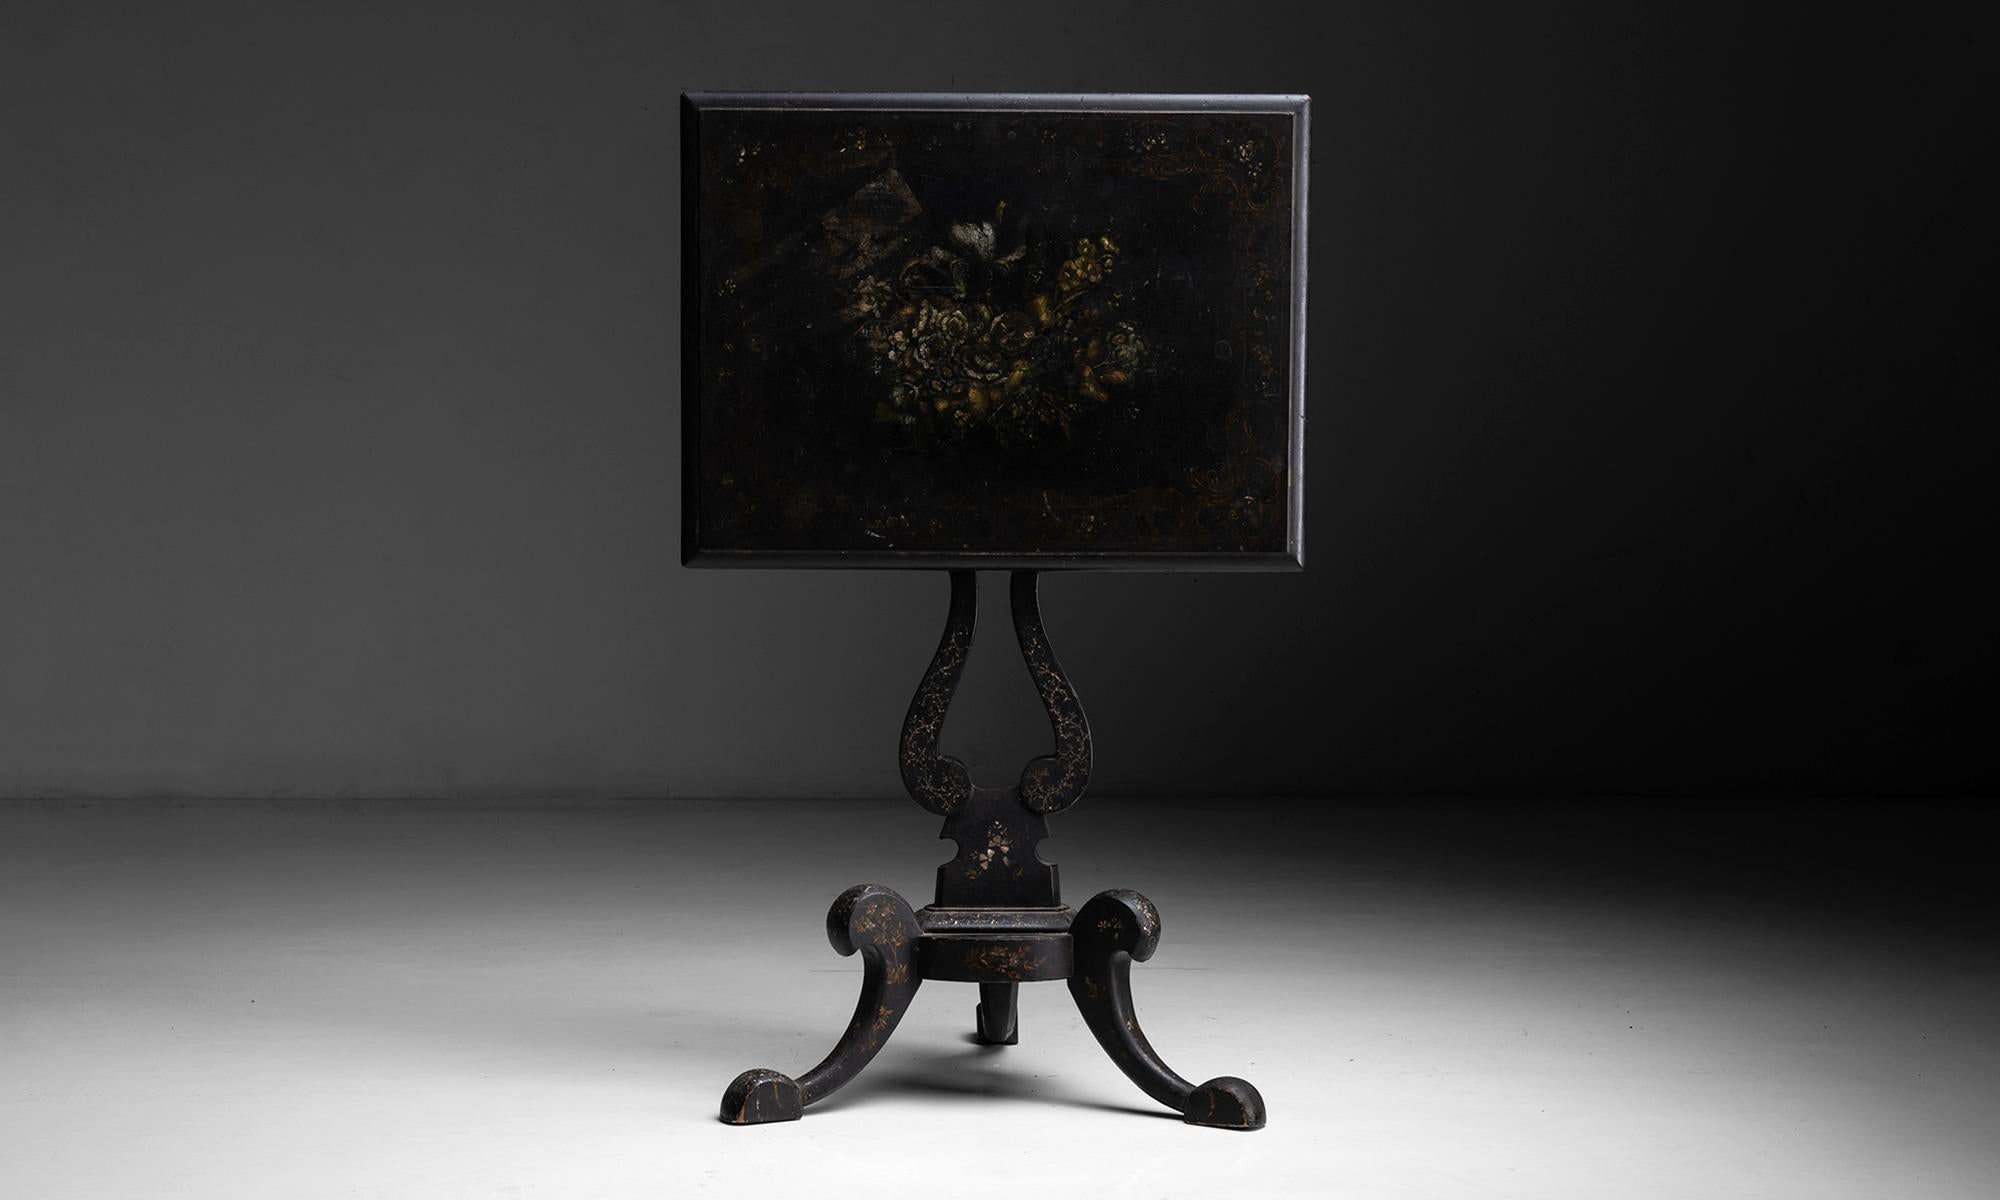 Hand painted tilt-top table

England, circa 1870

Elegant side table with hand painted floral decoration and mother of pearl inlay.

Measures: 24”L x 18.25”D x 27.25”H.